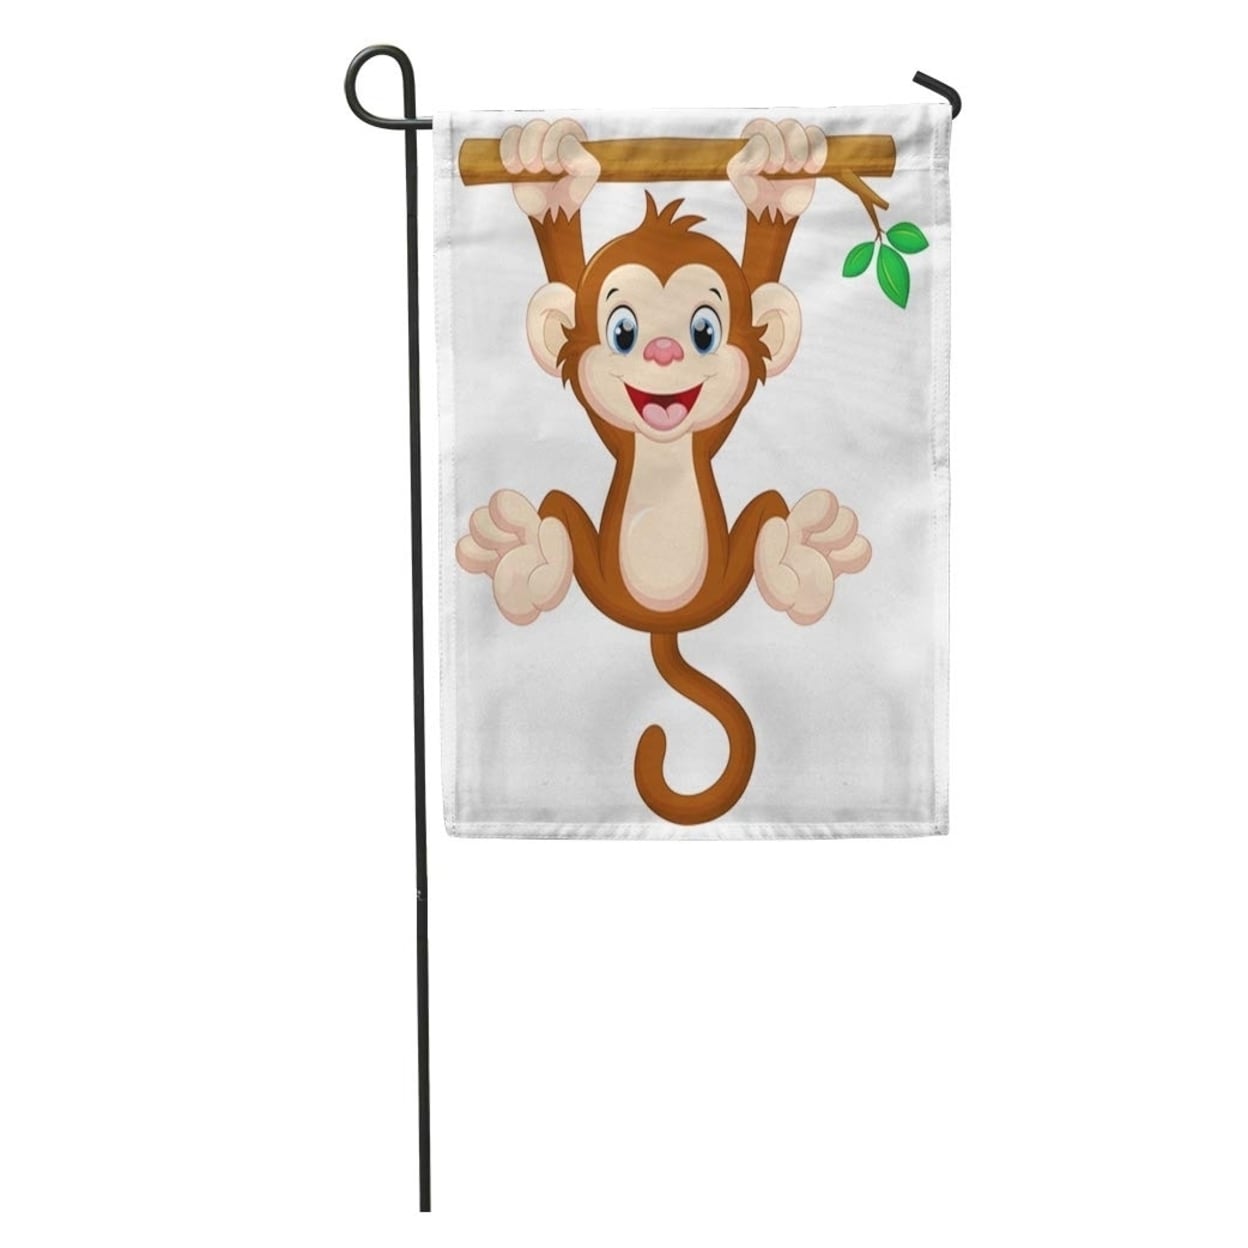 Brown Cartoon Cute Baby Monkey Hanging On Tree Clipart Tail Ape Garden Flag Decorative Flag House Banner 12x18 Inch N A On Sale Overstock